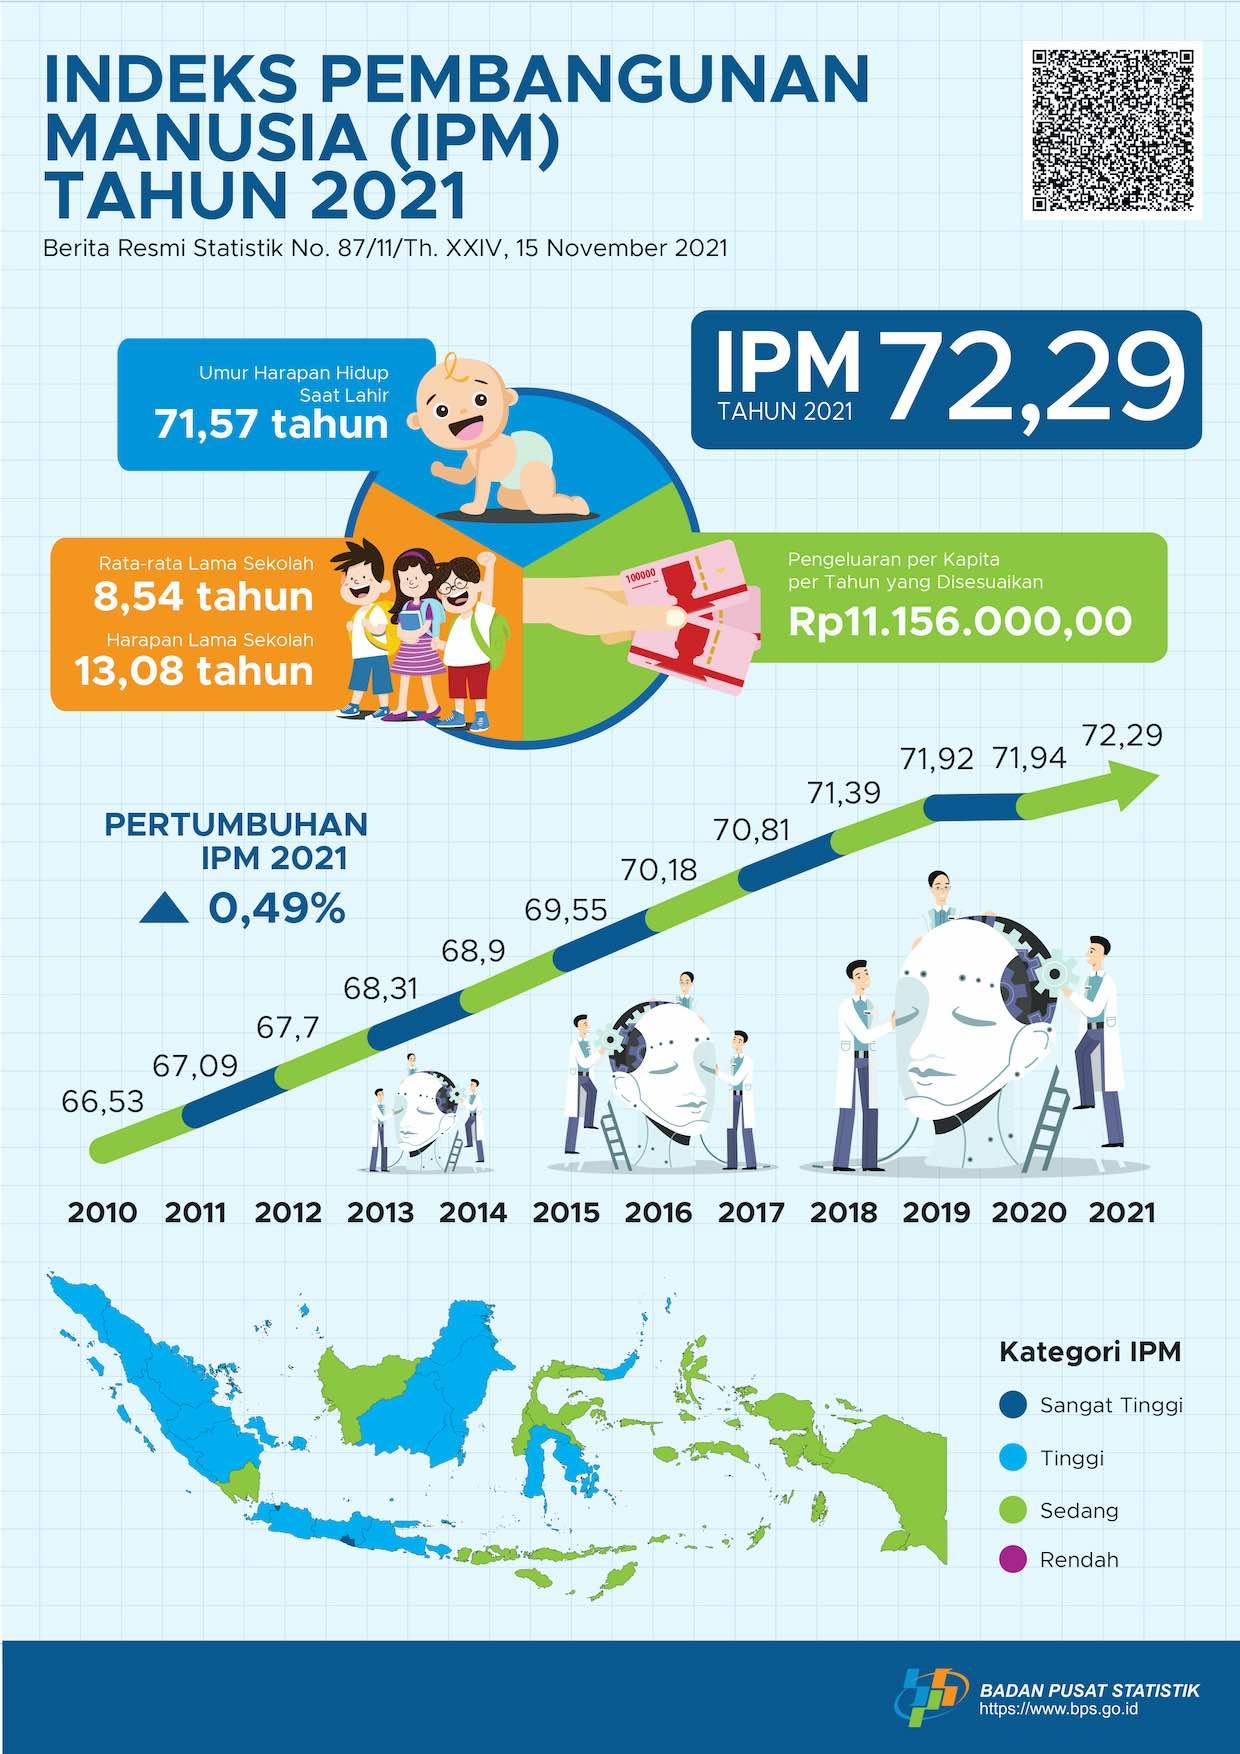 Indonesia's Human Development Index (HDI) in 2021 reached 72.29, an increase of 0.35 points (0.49 percent) compared to the previous year's (71.94)